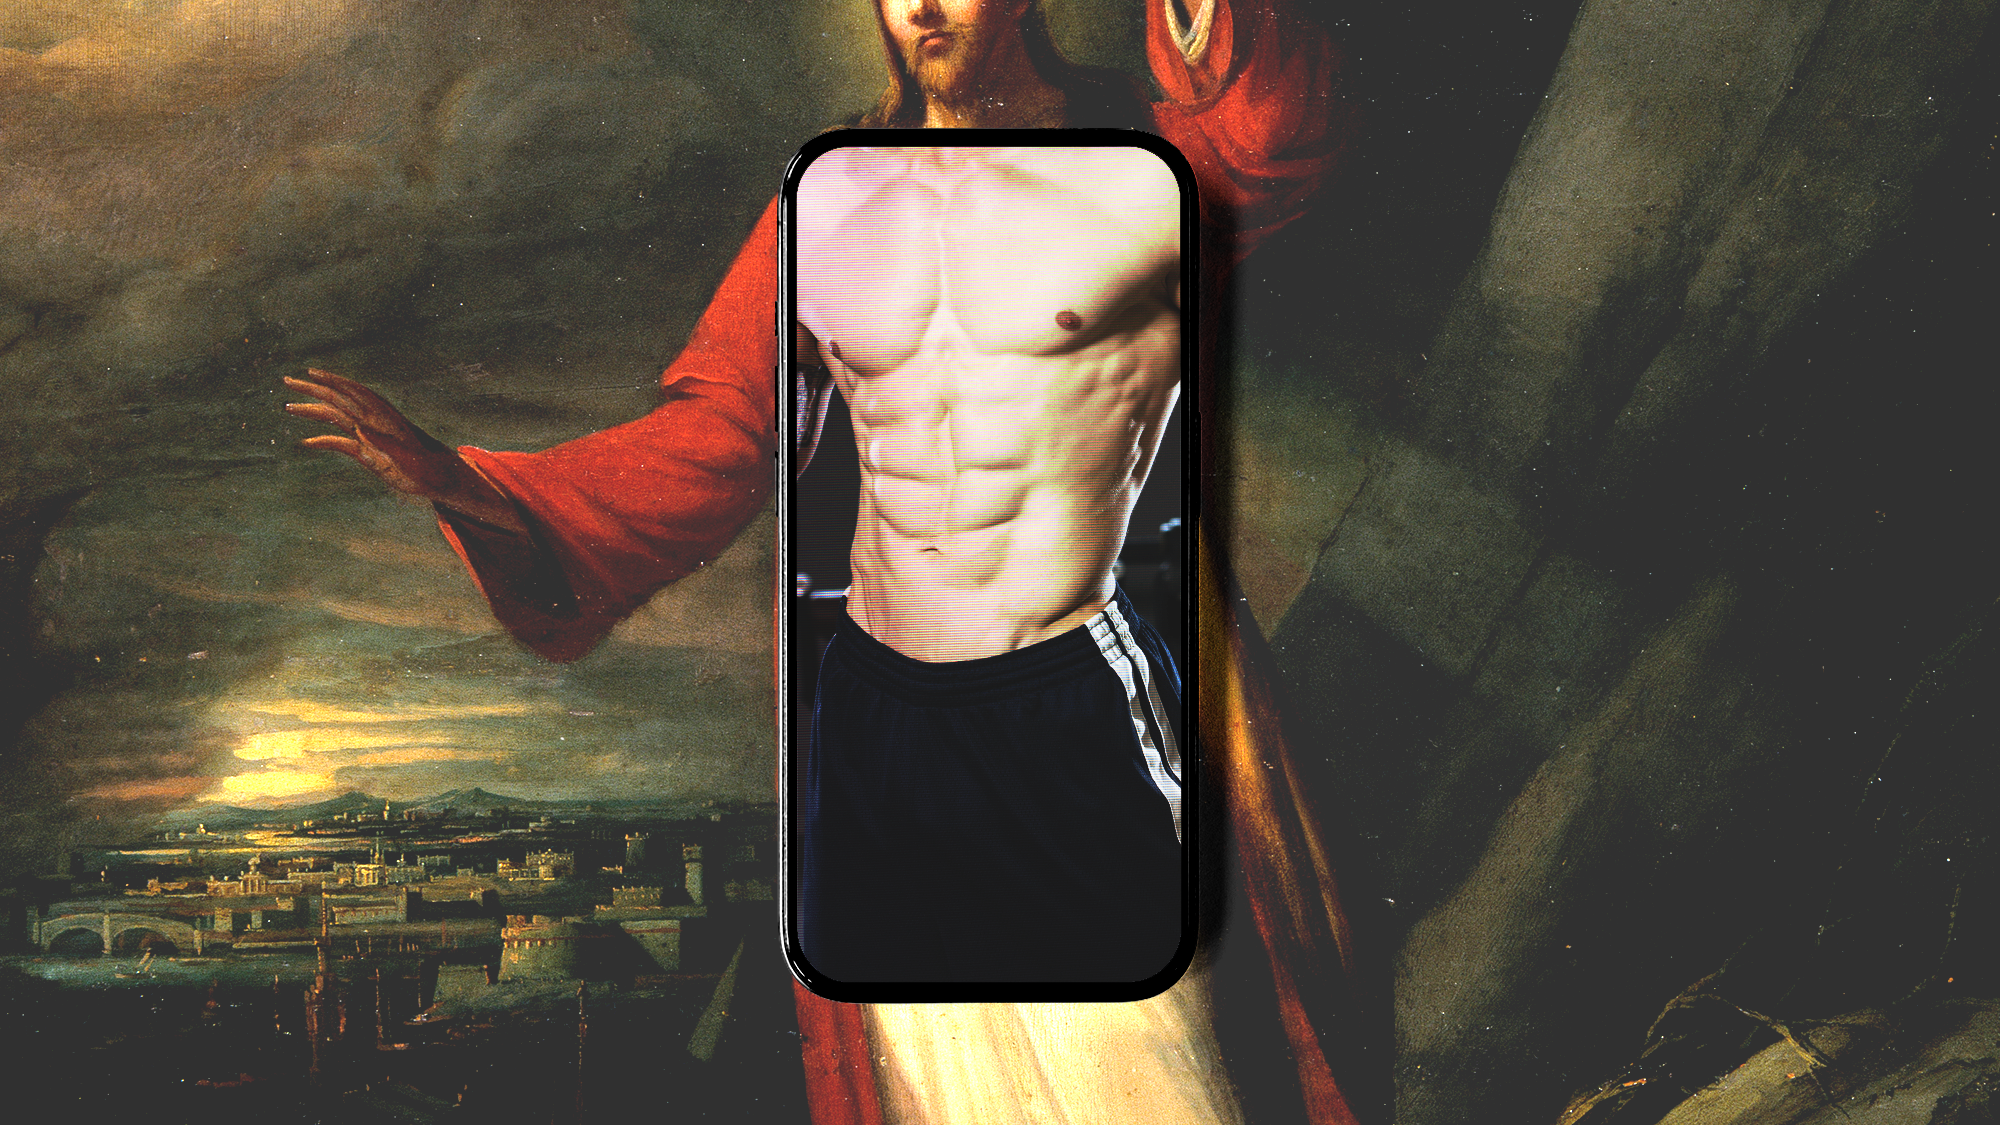 A painting of Jesus with a phone screen that shows abs